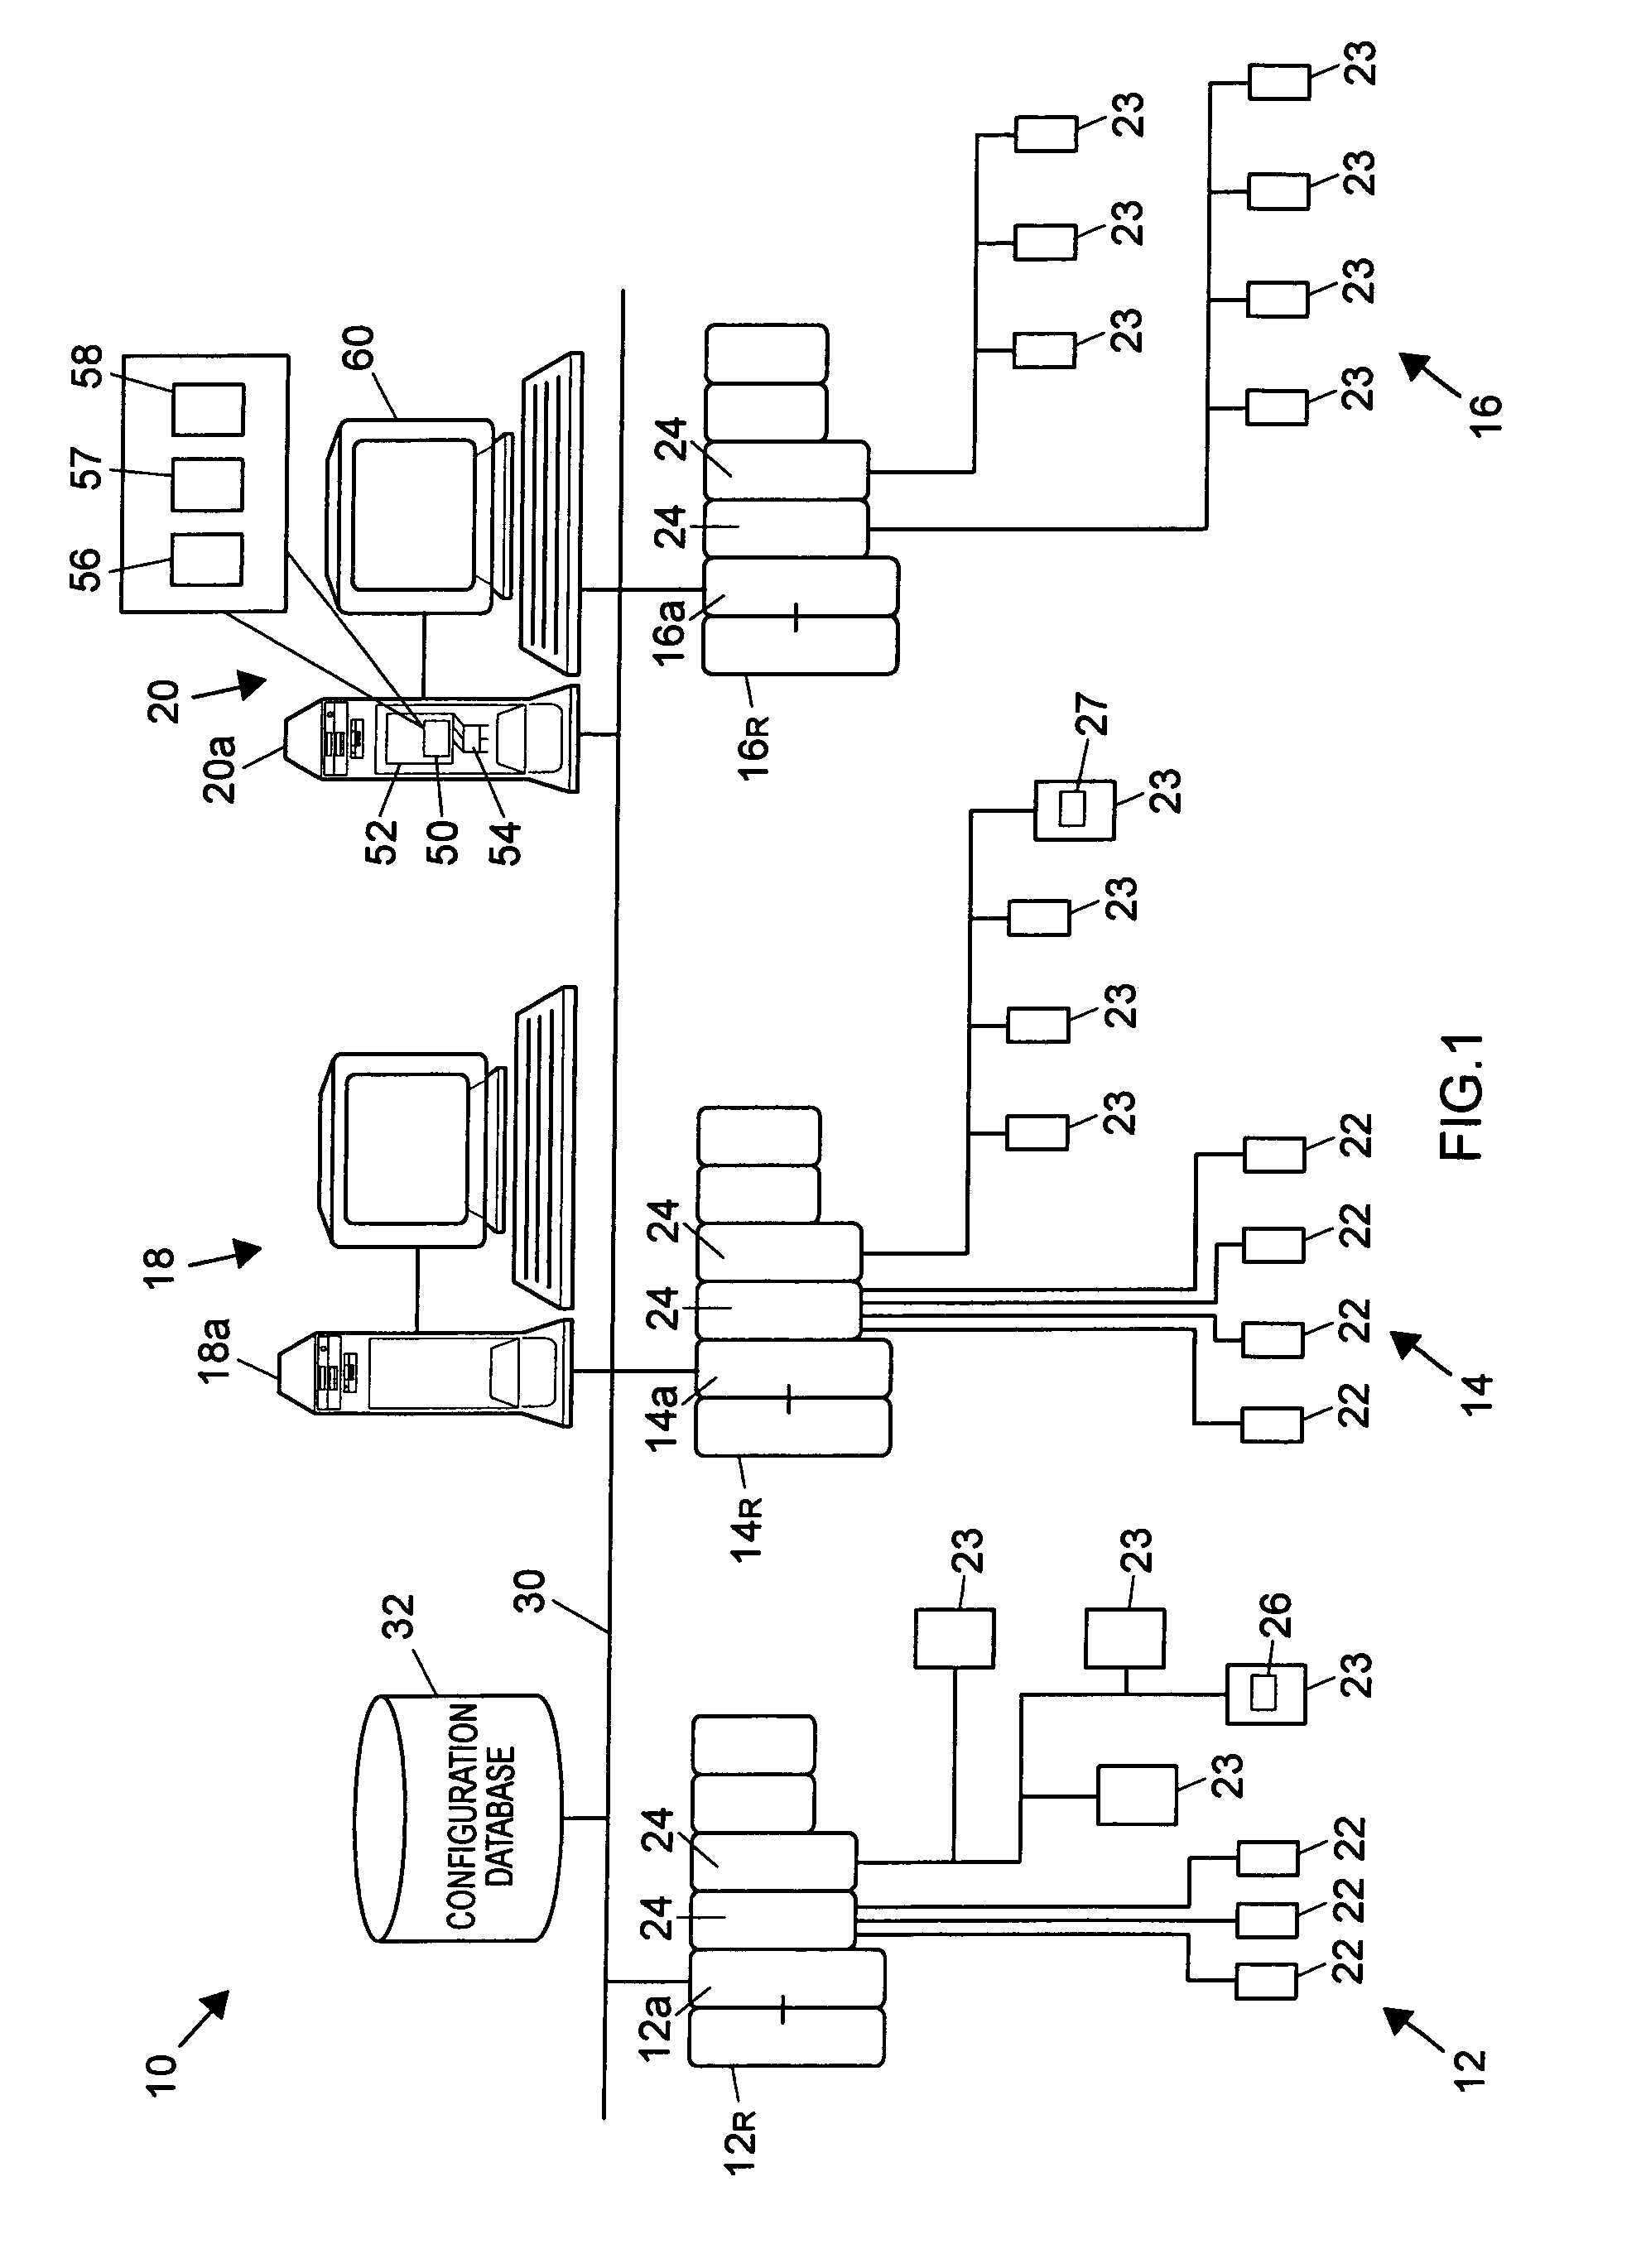 Simulation system for multi-node process control systems